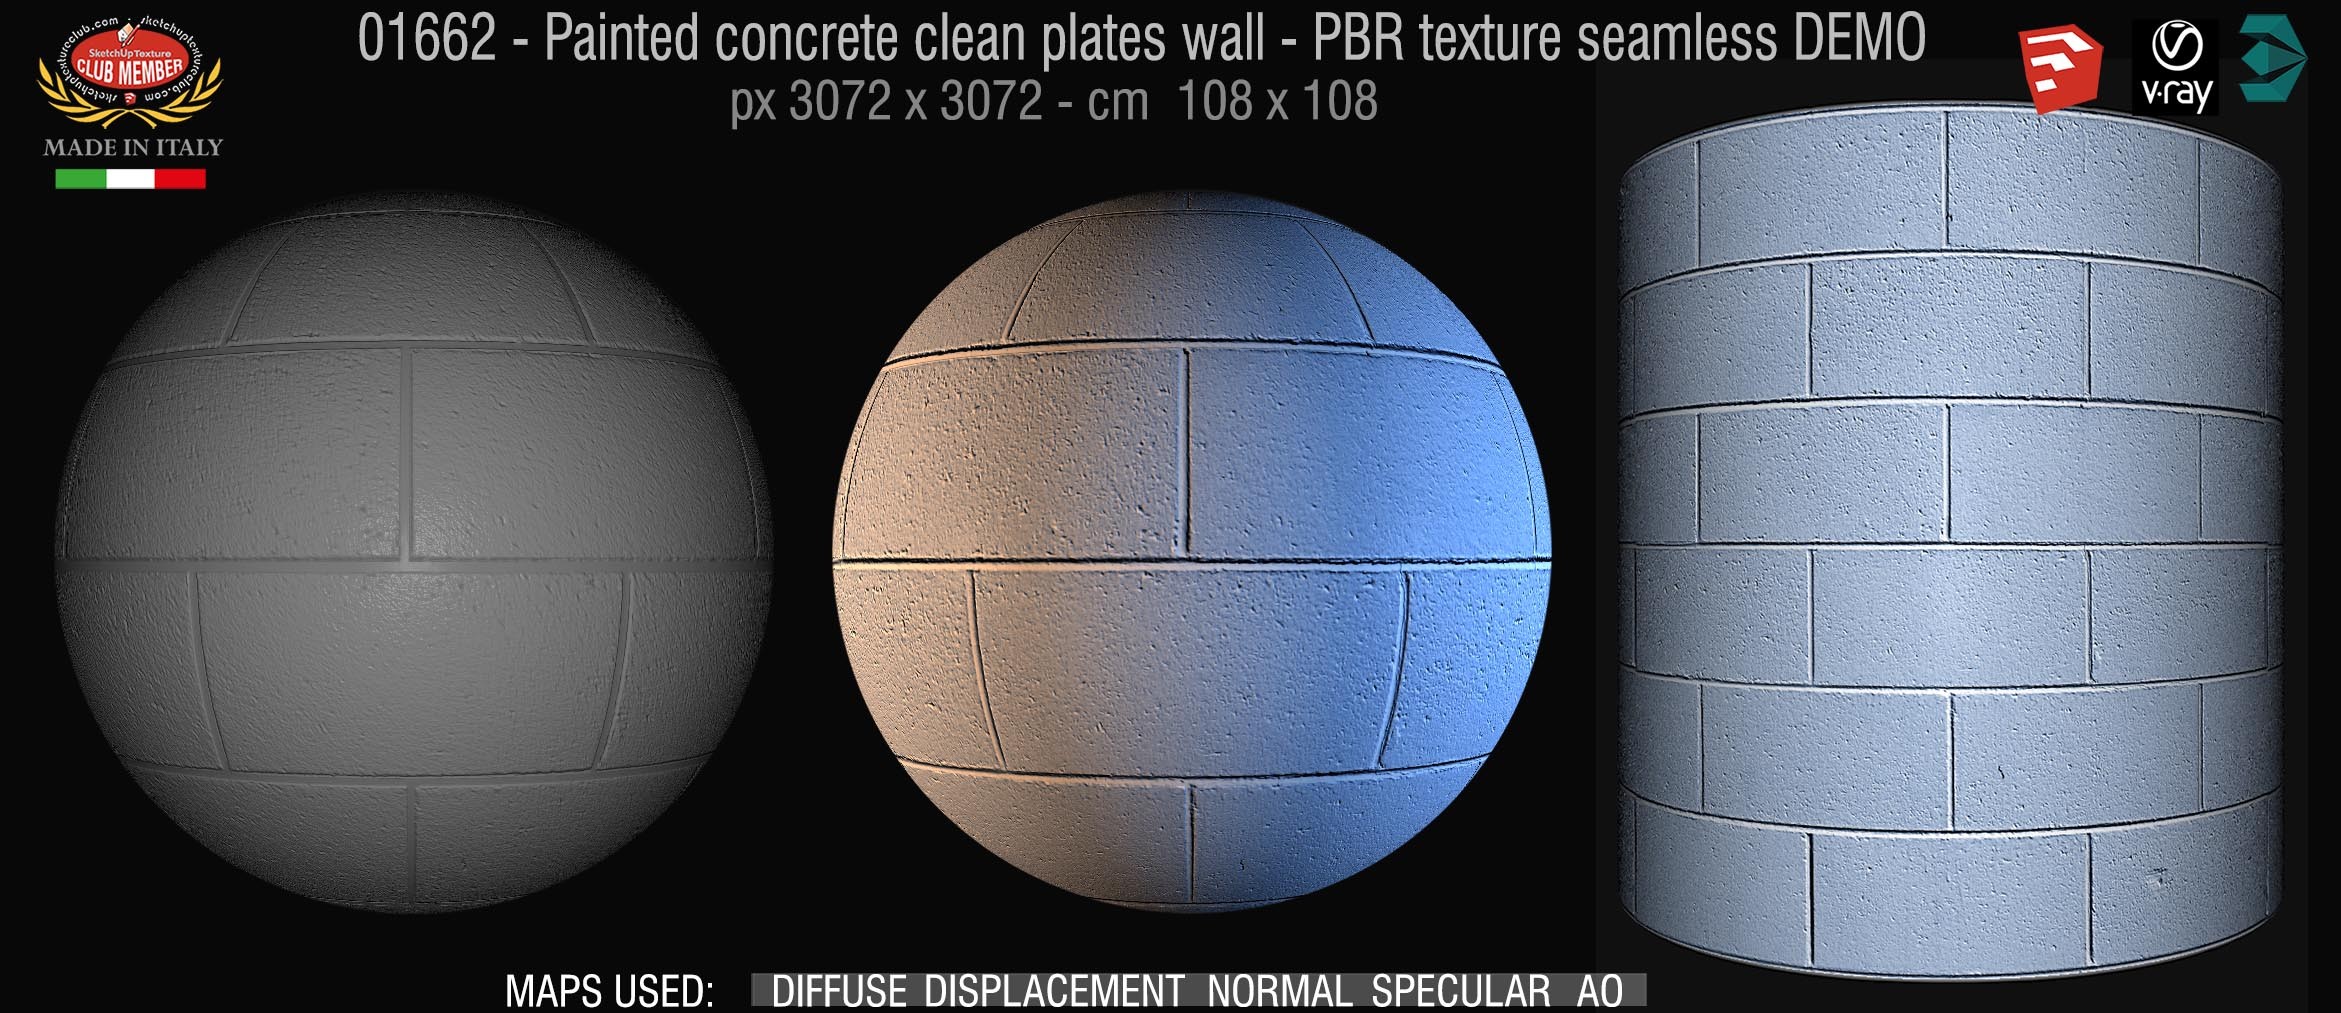 01662 Painted concrete clean plates wall PBR texture seamless DEMO